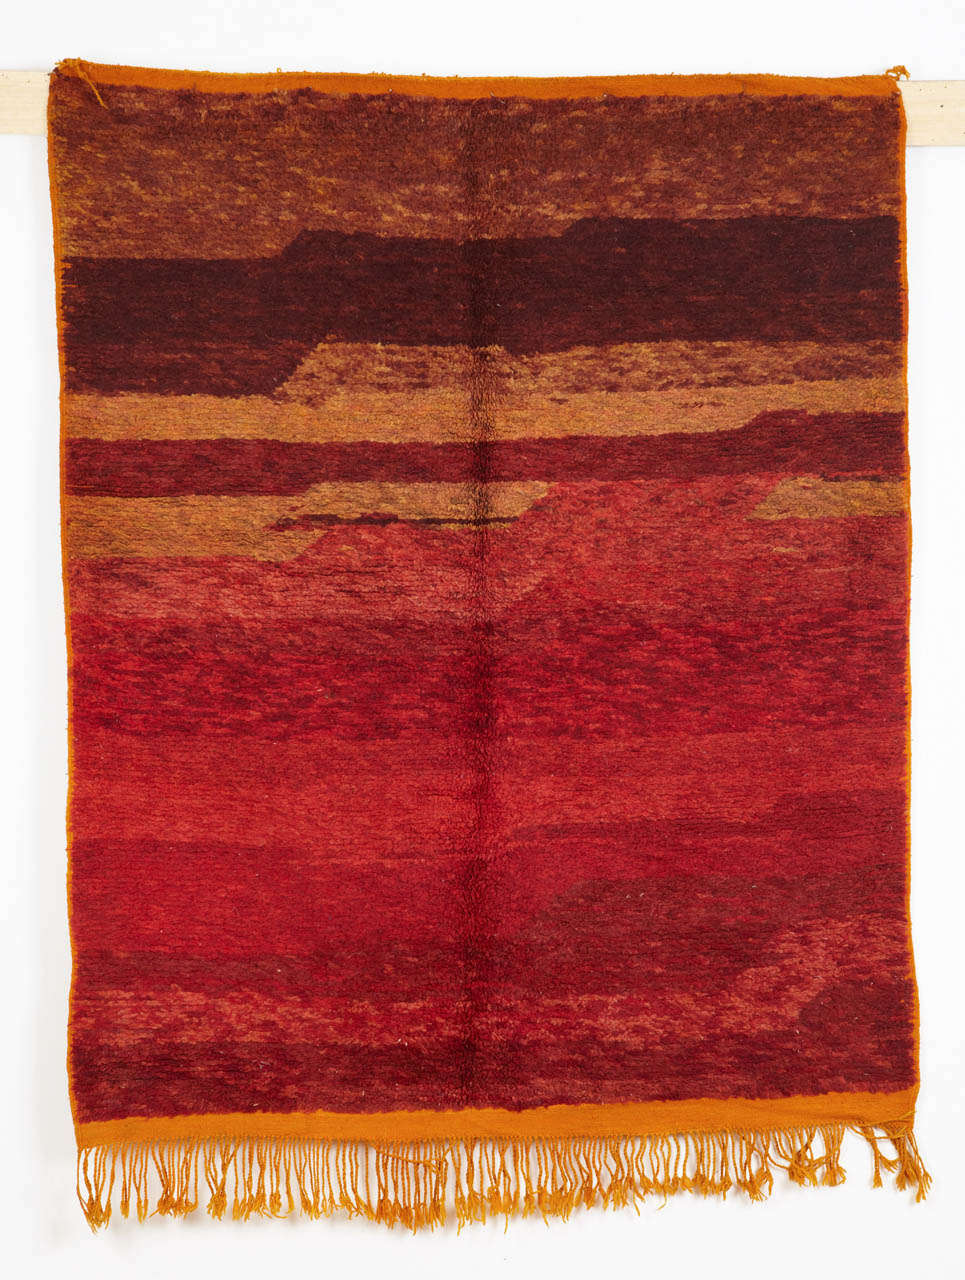 A rare Middle Atlas Berber rug from the Zemmour region, distinguished by the fact that it has pile on both sides- red in different gradations on the displayed side and orange in many shades on the back side.